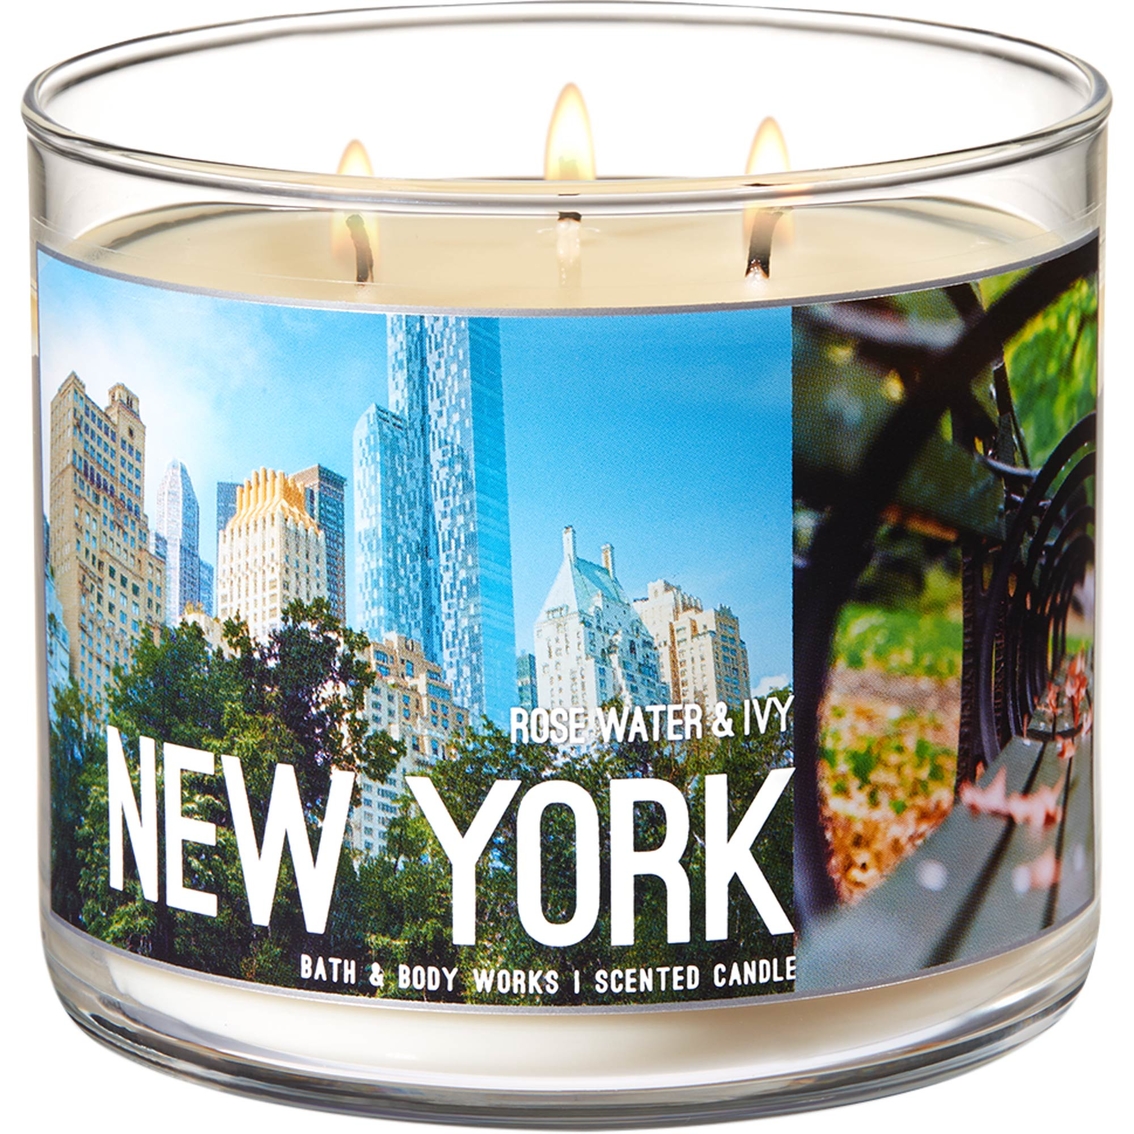 Bath & Body Works New York Rose Water & Ivy 3 Wick Candle | Home